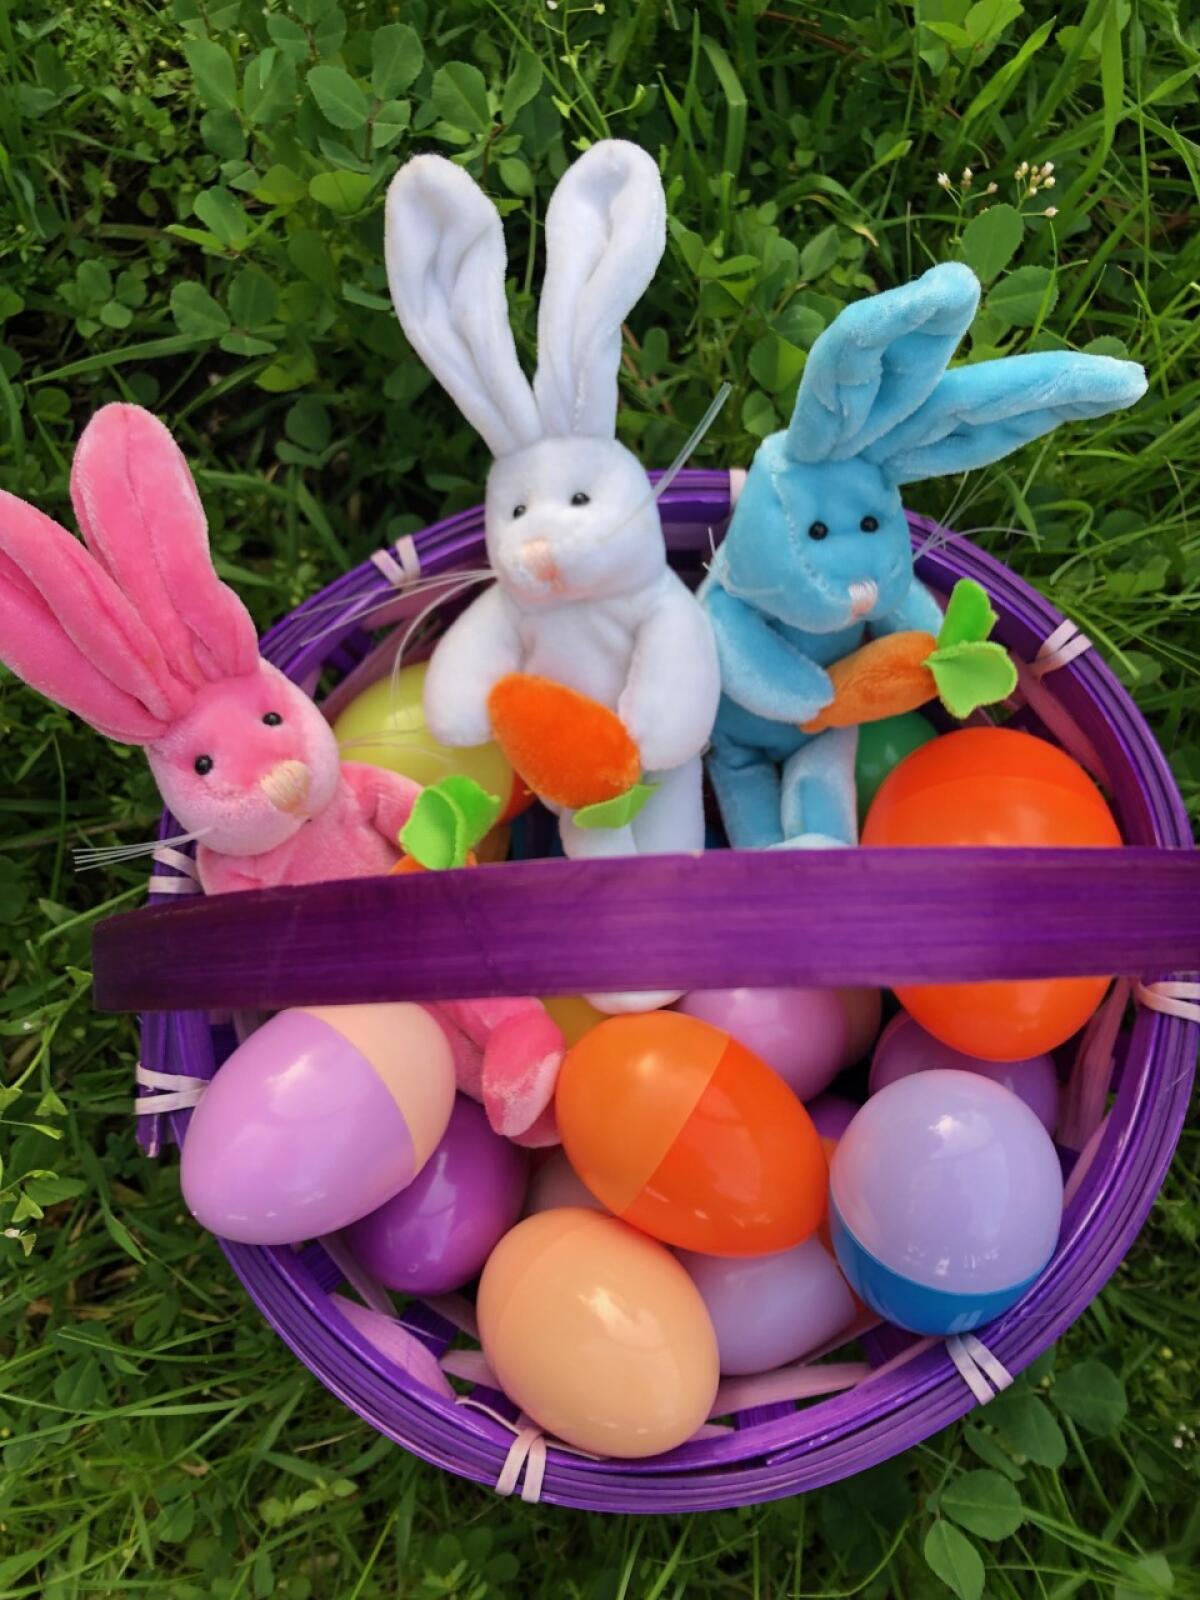 Opinion: Why is Easter associated with eggs and bunnies? - The San